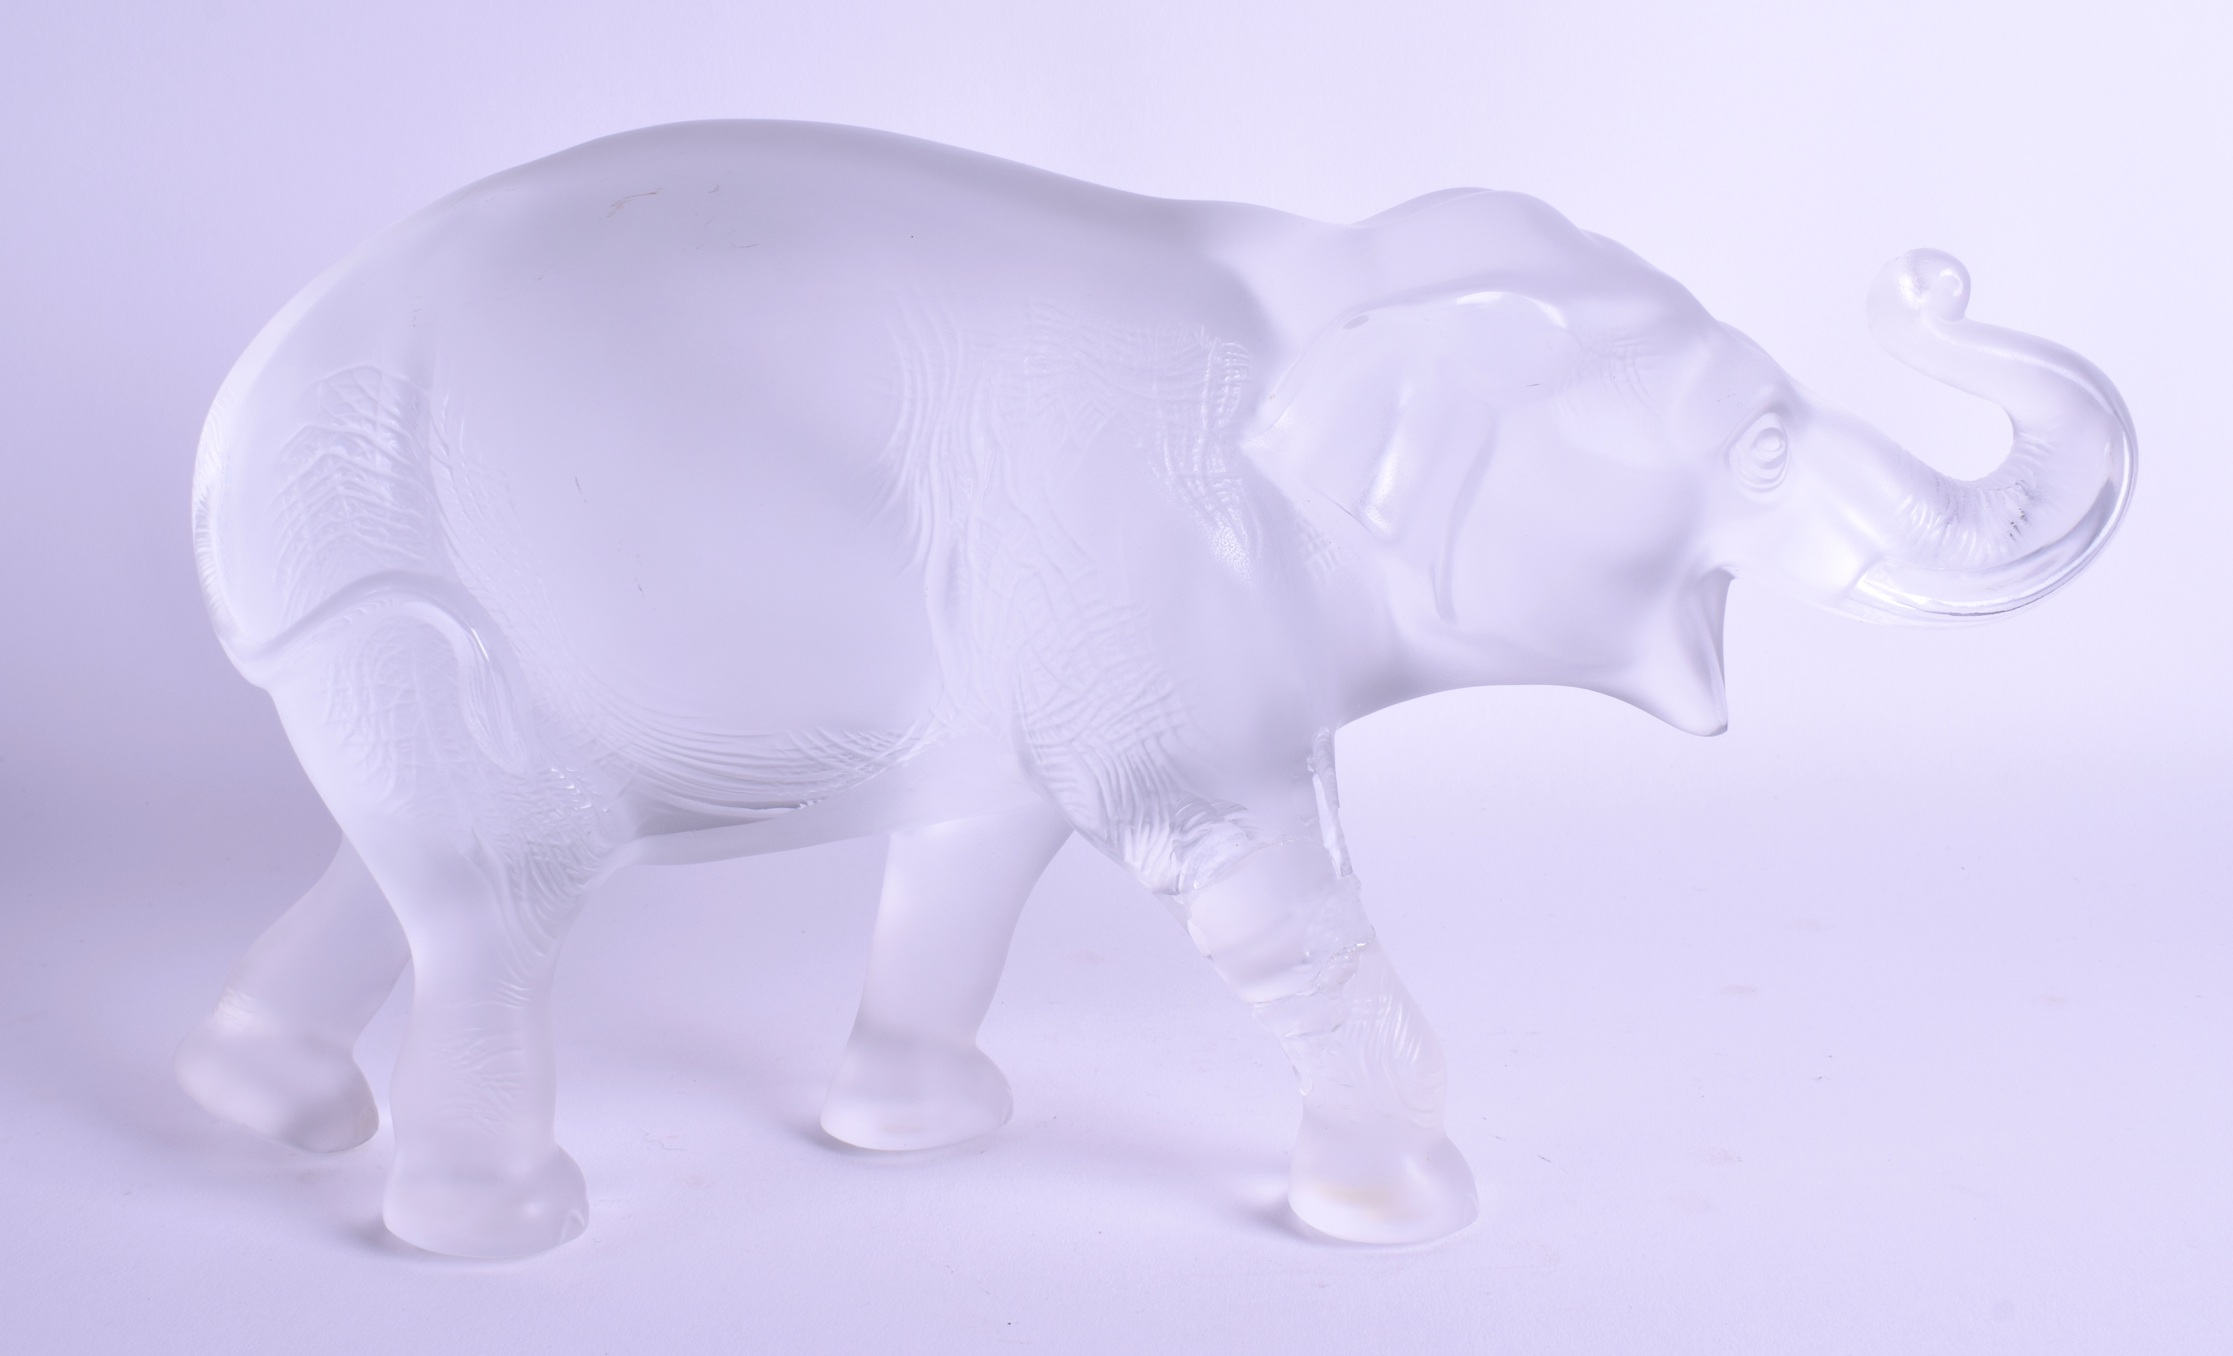 A RARE LARGE LALIQUE CRYSTAL GLASS FIGURE OF A SUMATRA ELEPHANT modelled in a roaming stance. 35 cm - Image 3 of 5